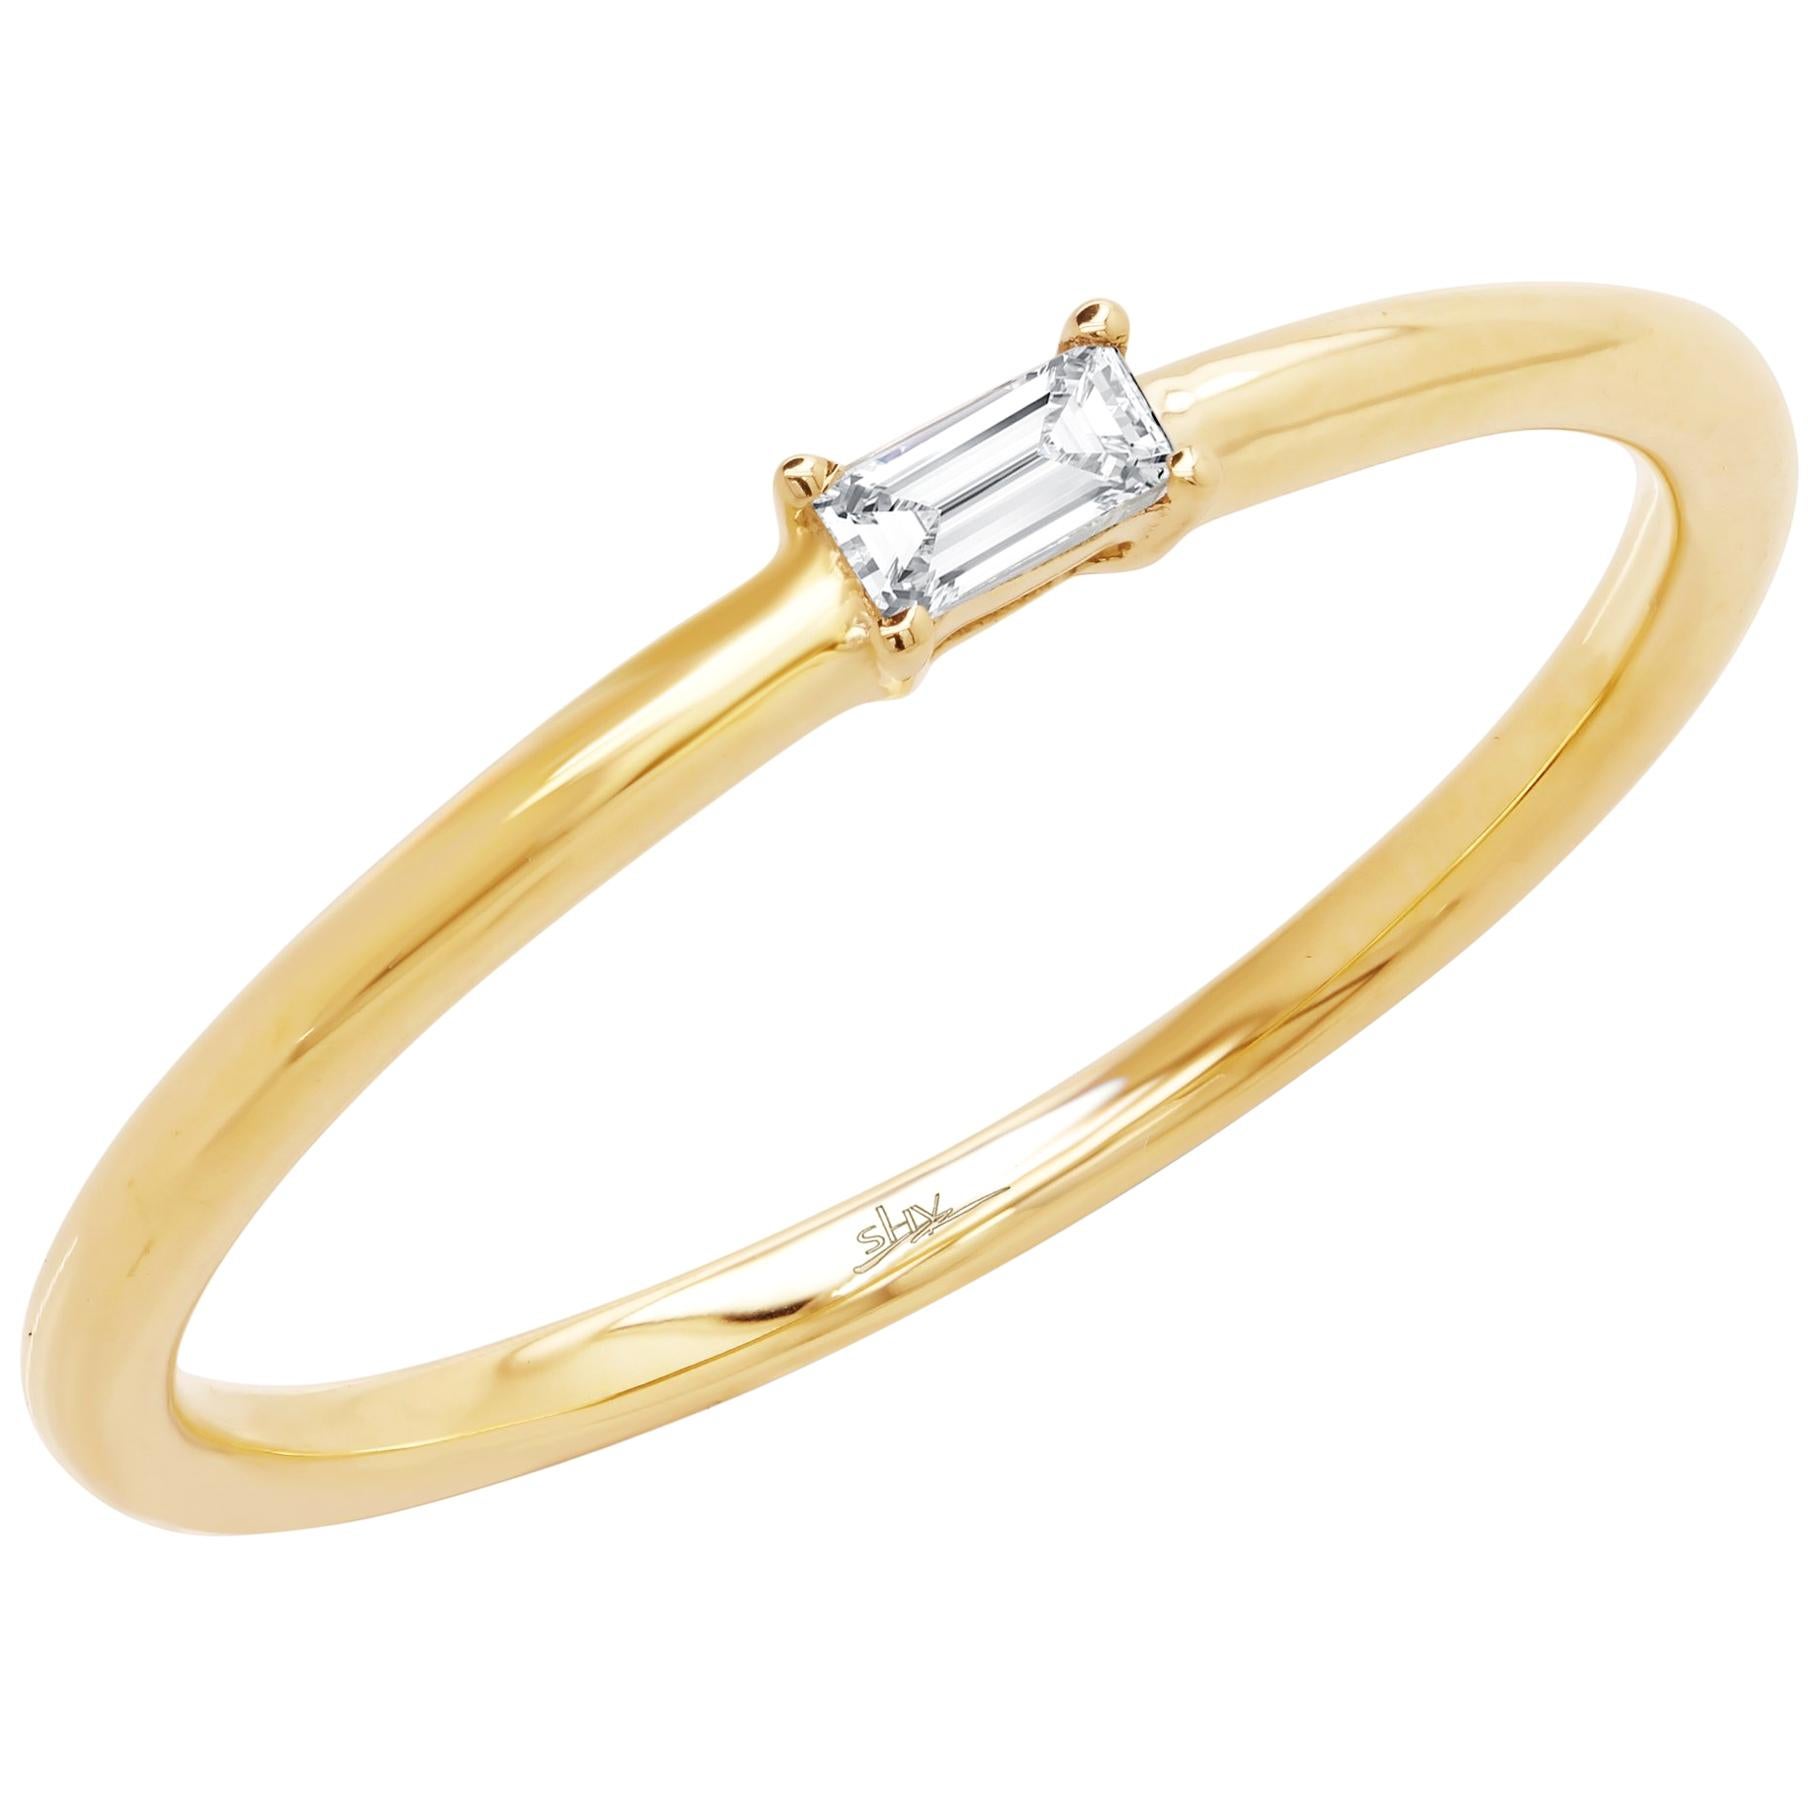 Petite and trendy, this ring is crafted in 14k yellow gold and encrusted with a baguette cut diamond weighing 0.07cttw. Height: 2.2mm. Thickness: 2.5mm. Width: 2.1mm. Ring size: 7. Total weight: 1.50 gms. Super stackable and can be mix matched.